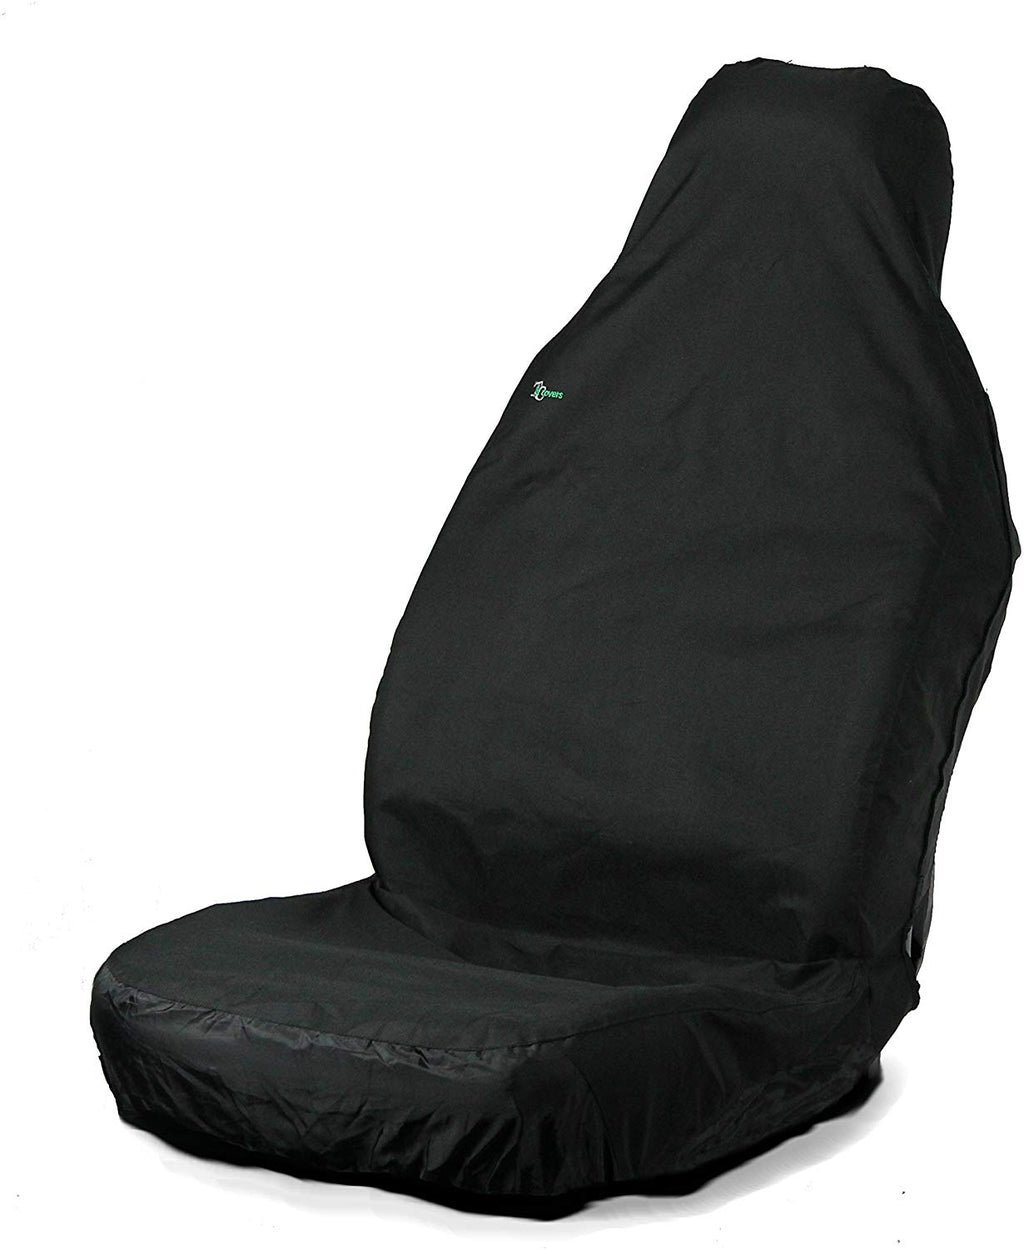 Town & Country Muddy Waterproof 3D BLACK Car Front Single Seat Cover Protector